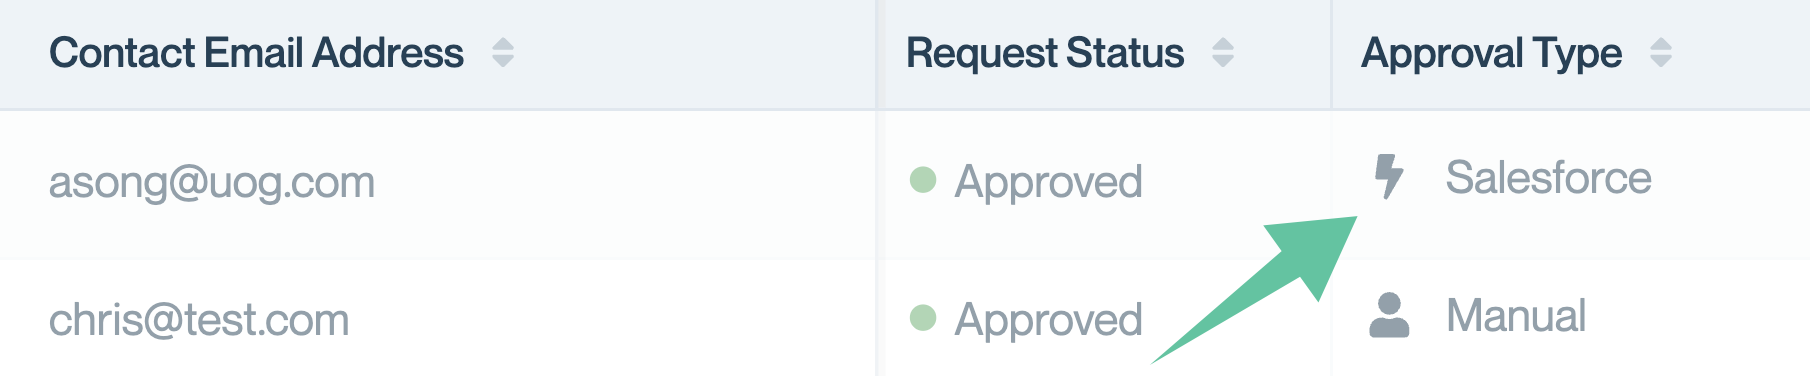 3\) Access requests can be automatically approved (and NDAs bypassed) by integrating with Salesforce.